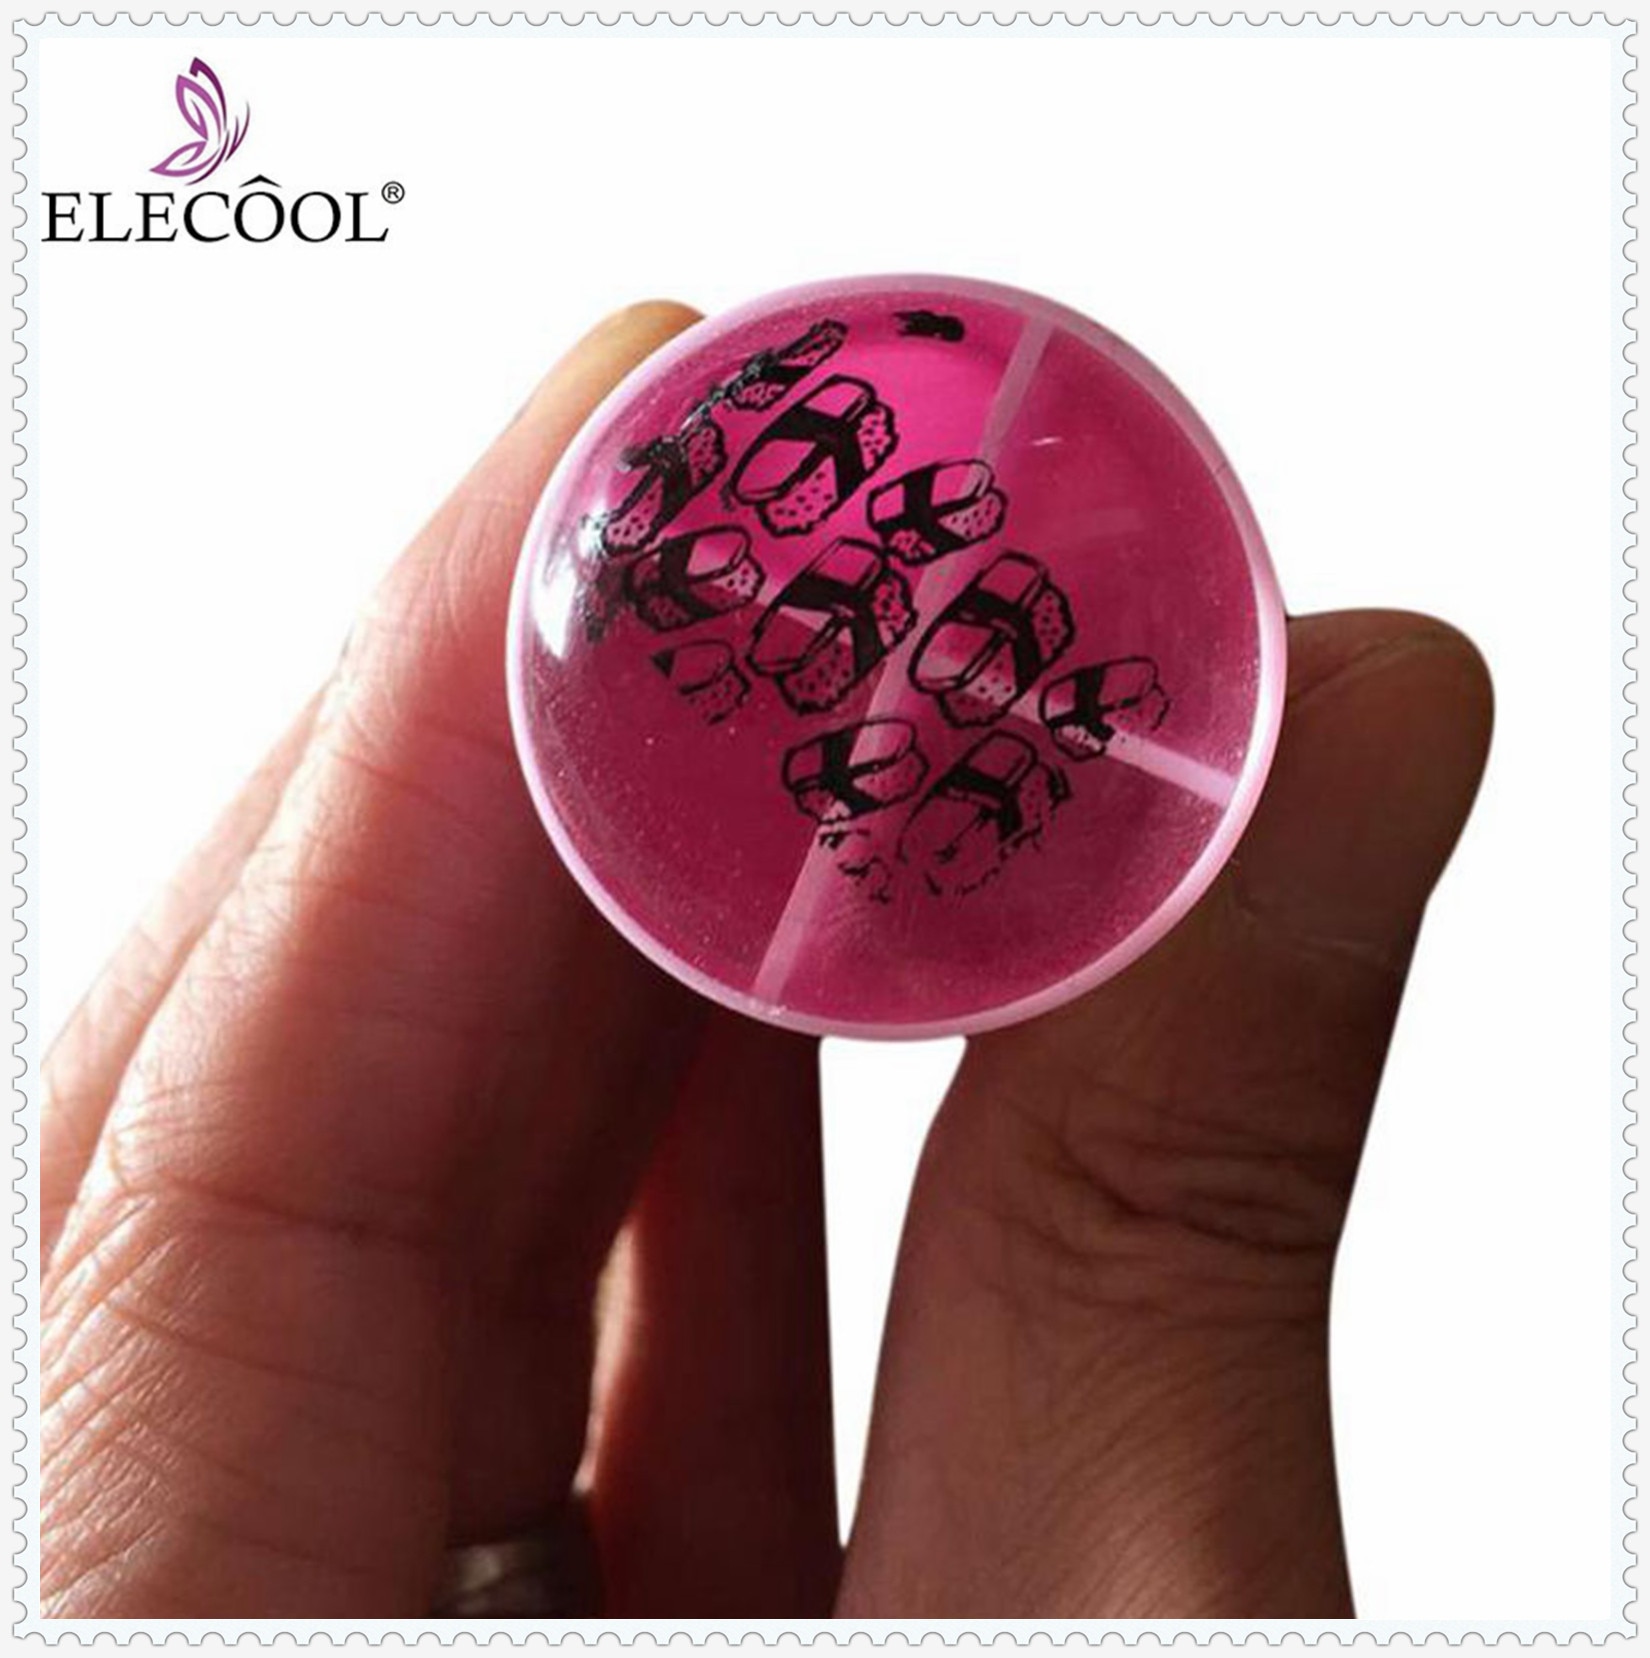 ELECOOL 1 St DIY Nail Art Siliconen Clear Wit Jelly Stempelen Stamper Schraper Afbeelding Plaat Transfer Manicure Tool Voor Mode Lady